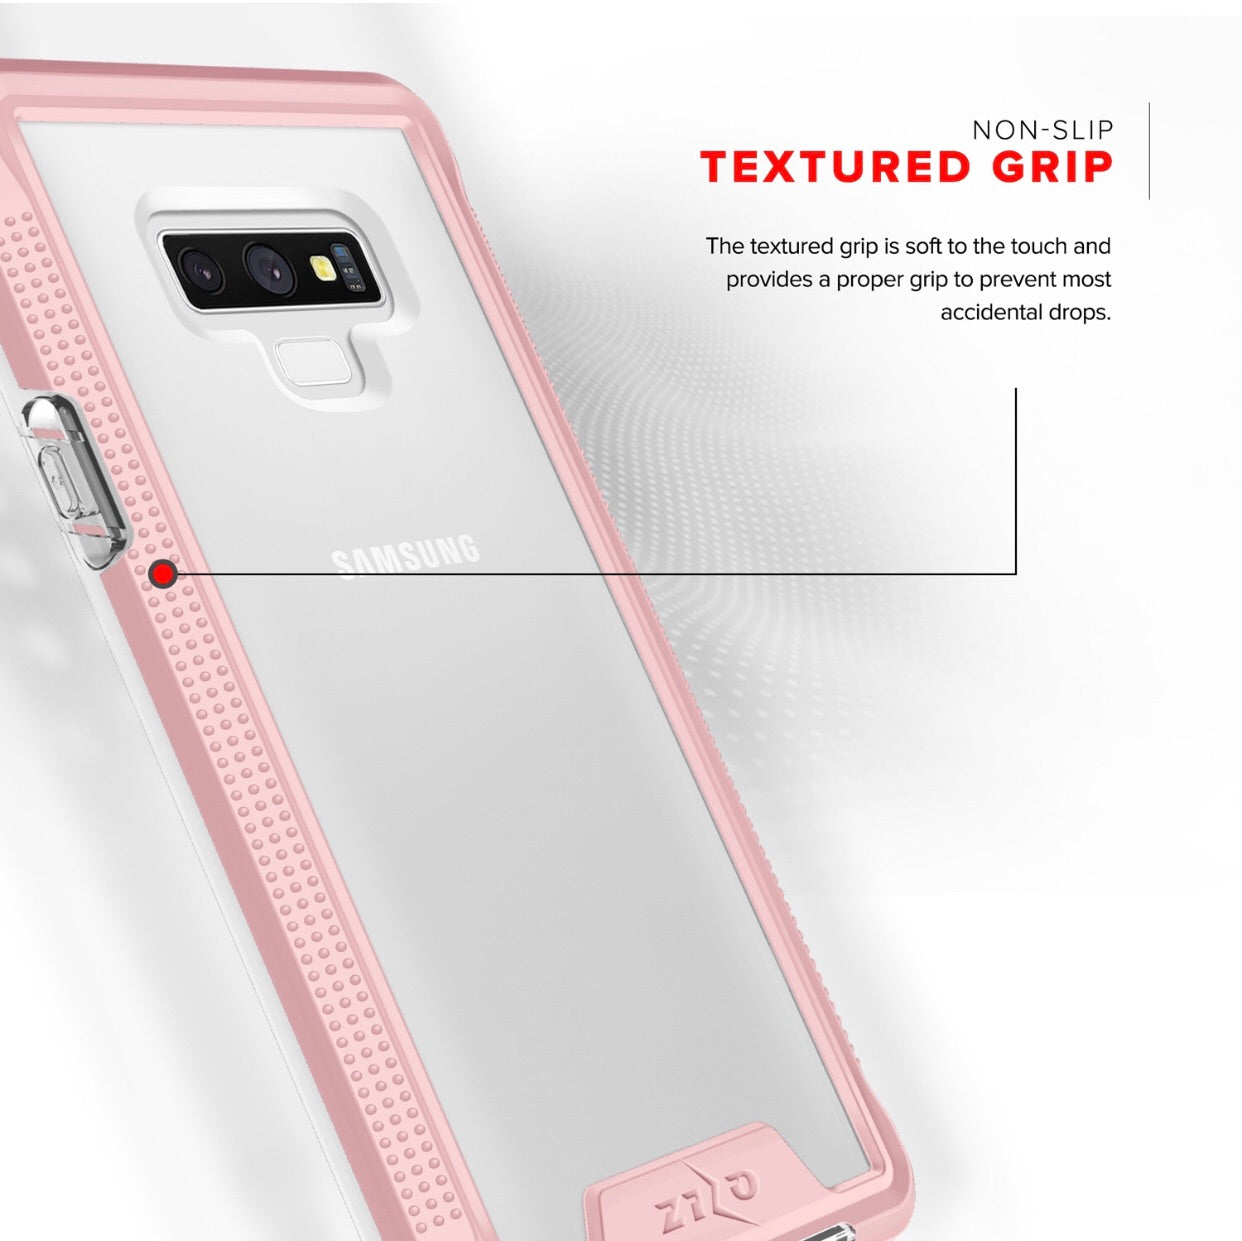 Samsung Galaxy Note 9 Zizo ION Triple Layered Hybrid Case w/ Tempered Glass Screen Protector - Rose Gold / Silver